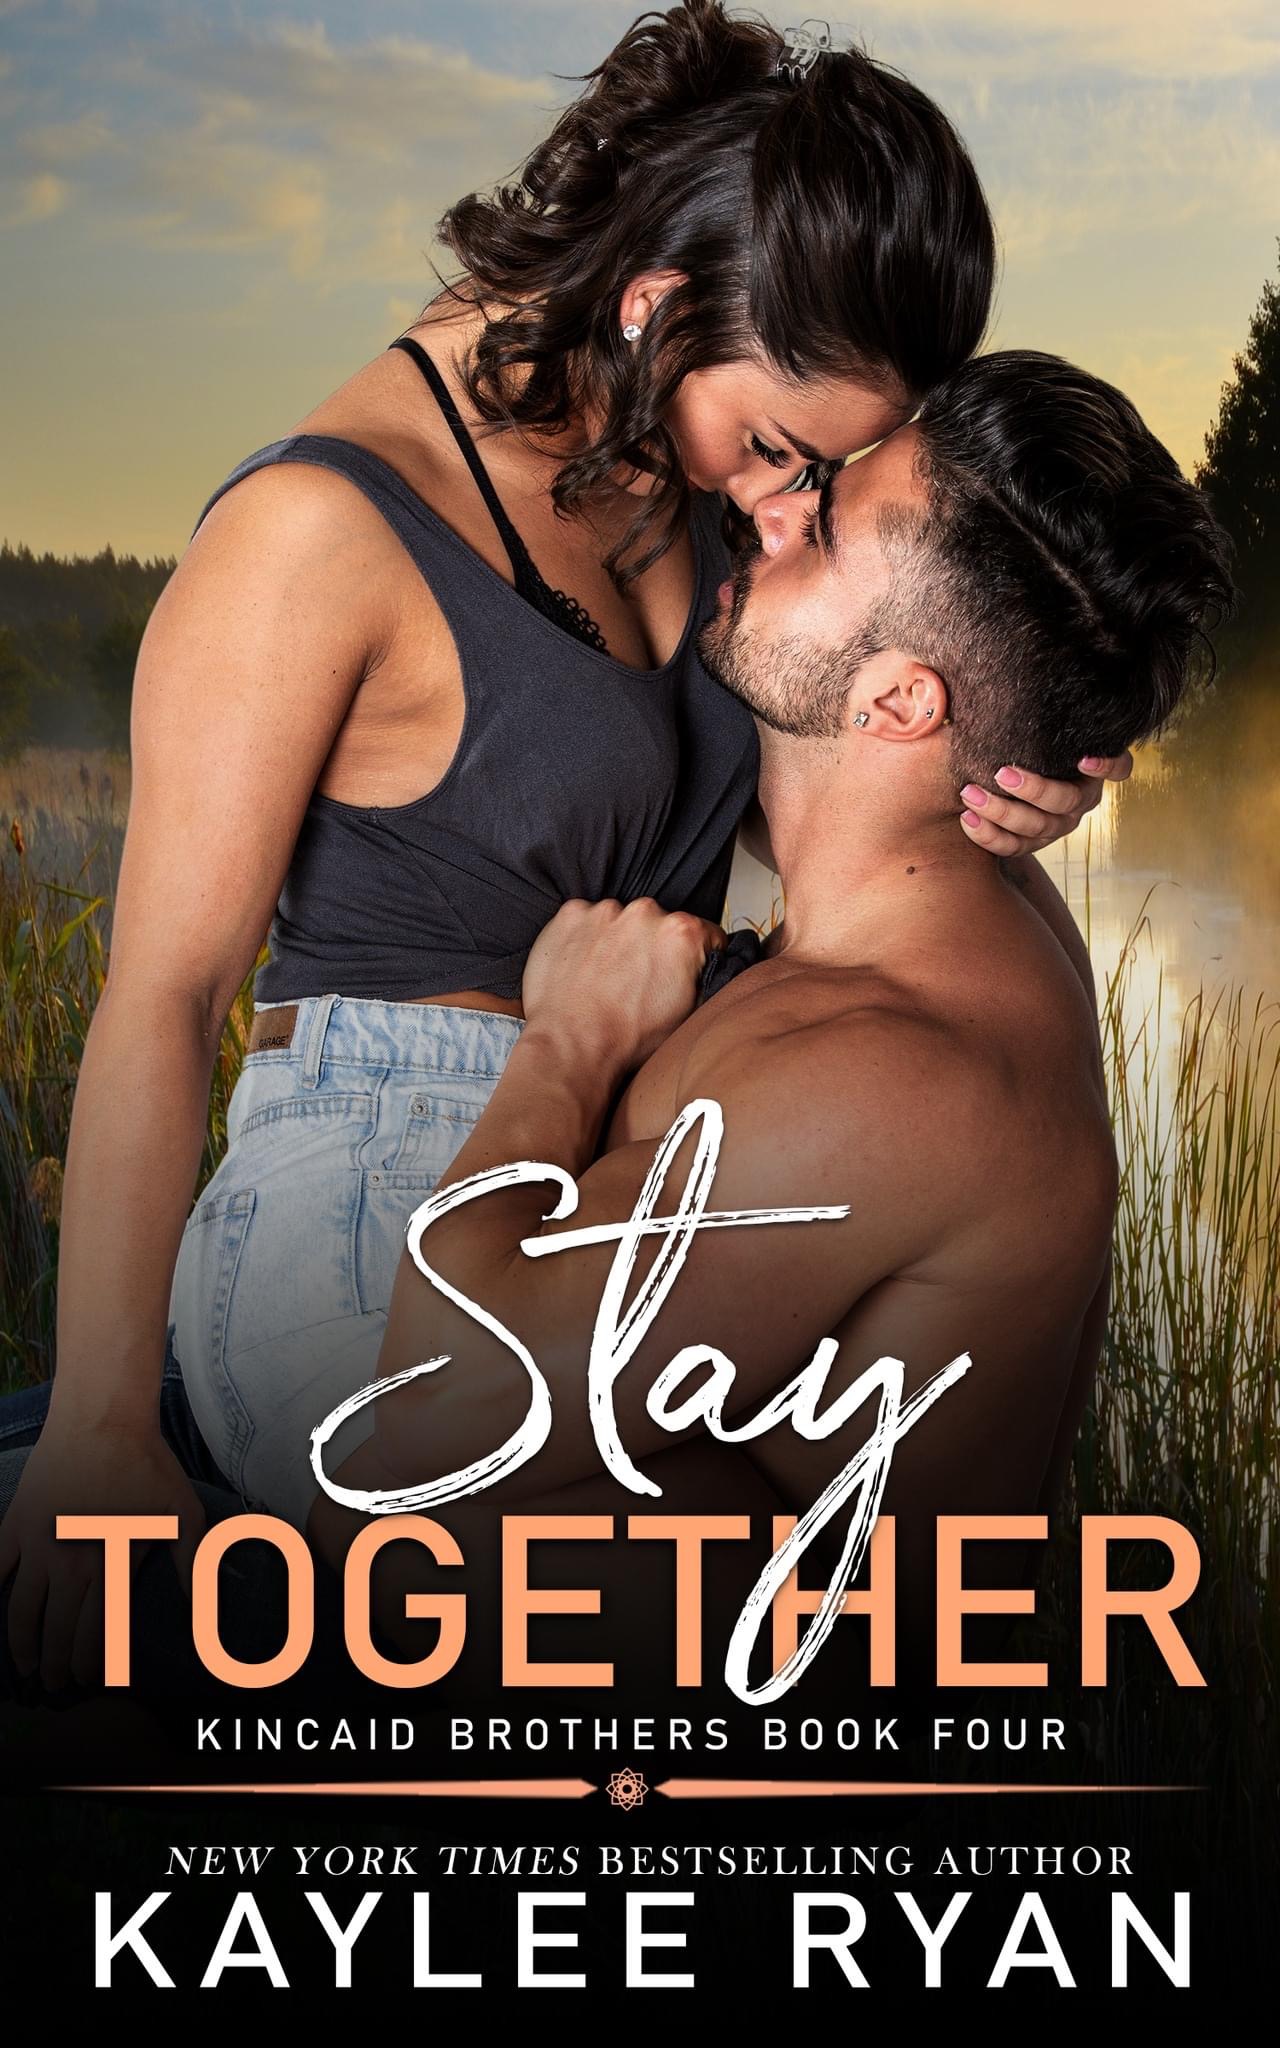 Stay Together by Kaylee Ryan PDF Download